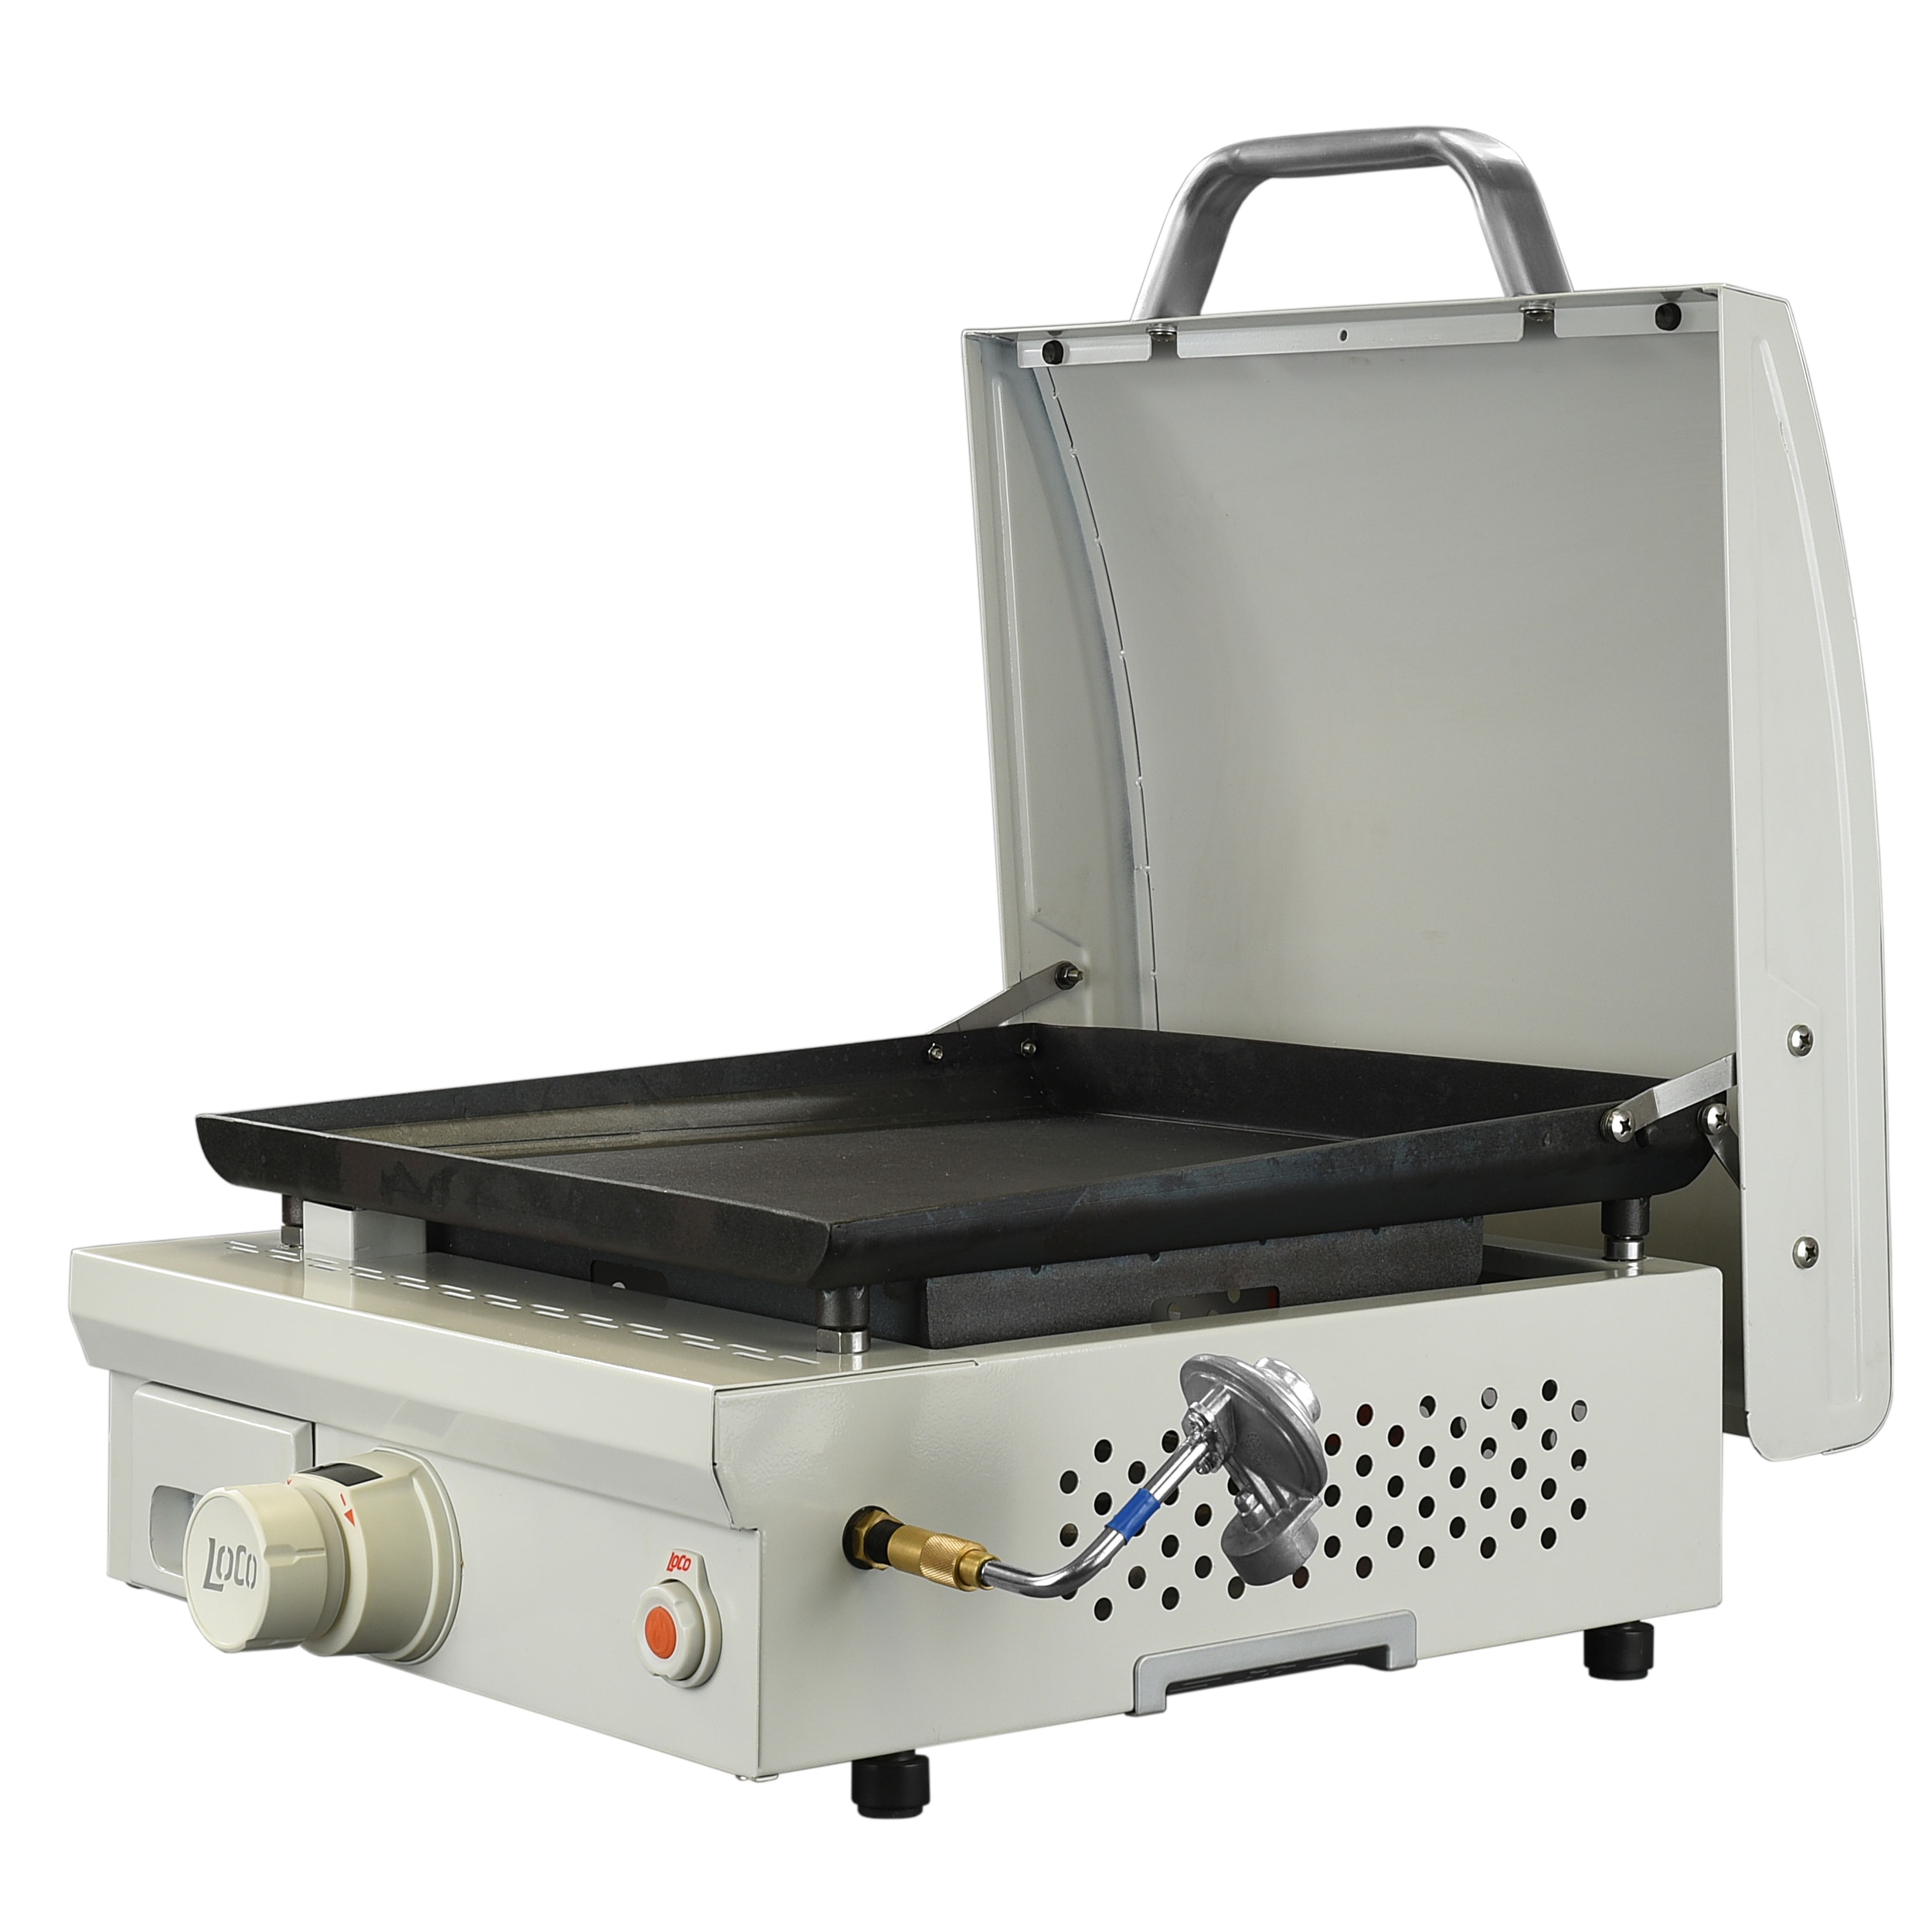 Loco 2 Burner Liquid Propane Outdoor Griddle with Hood Gray